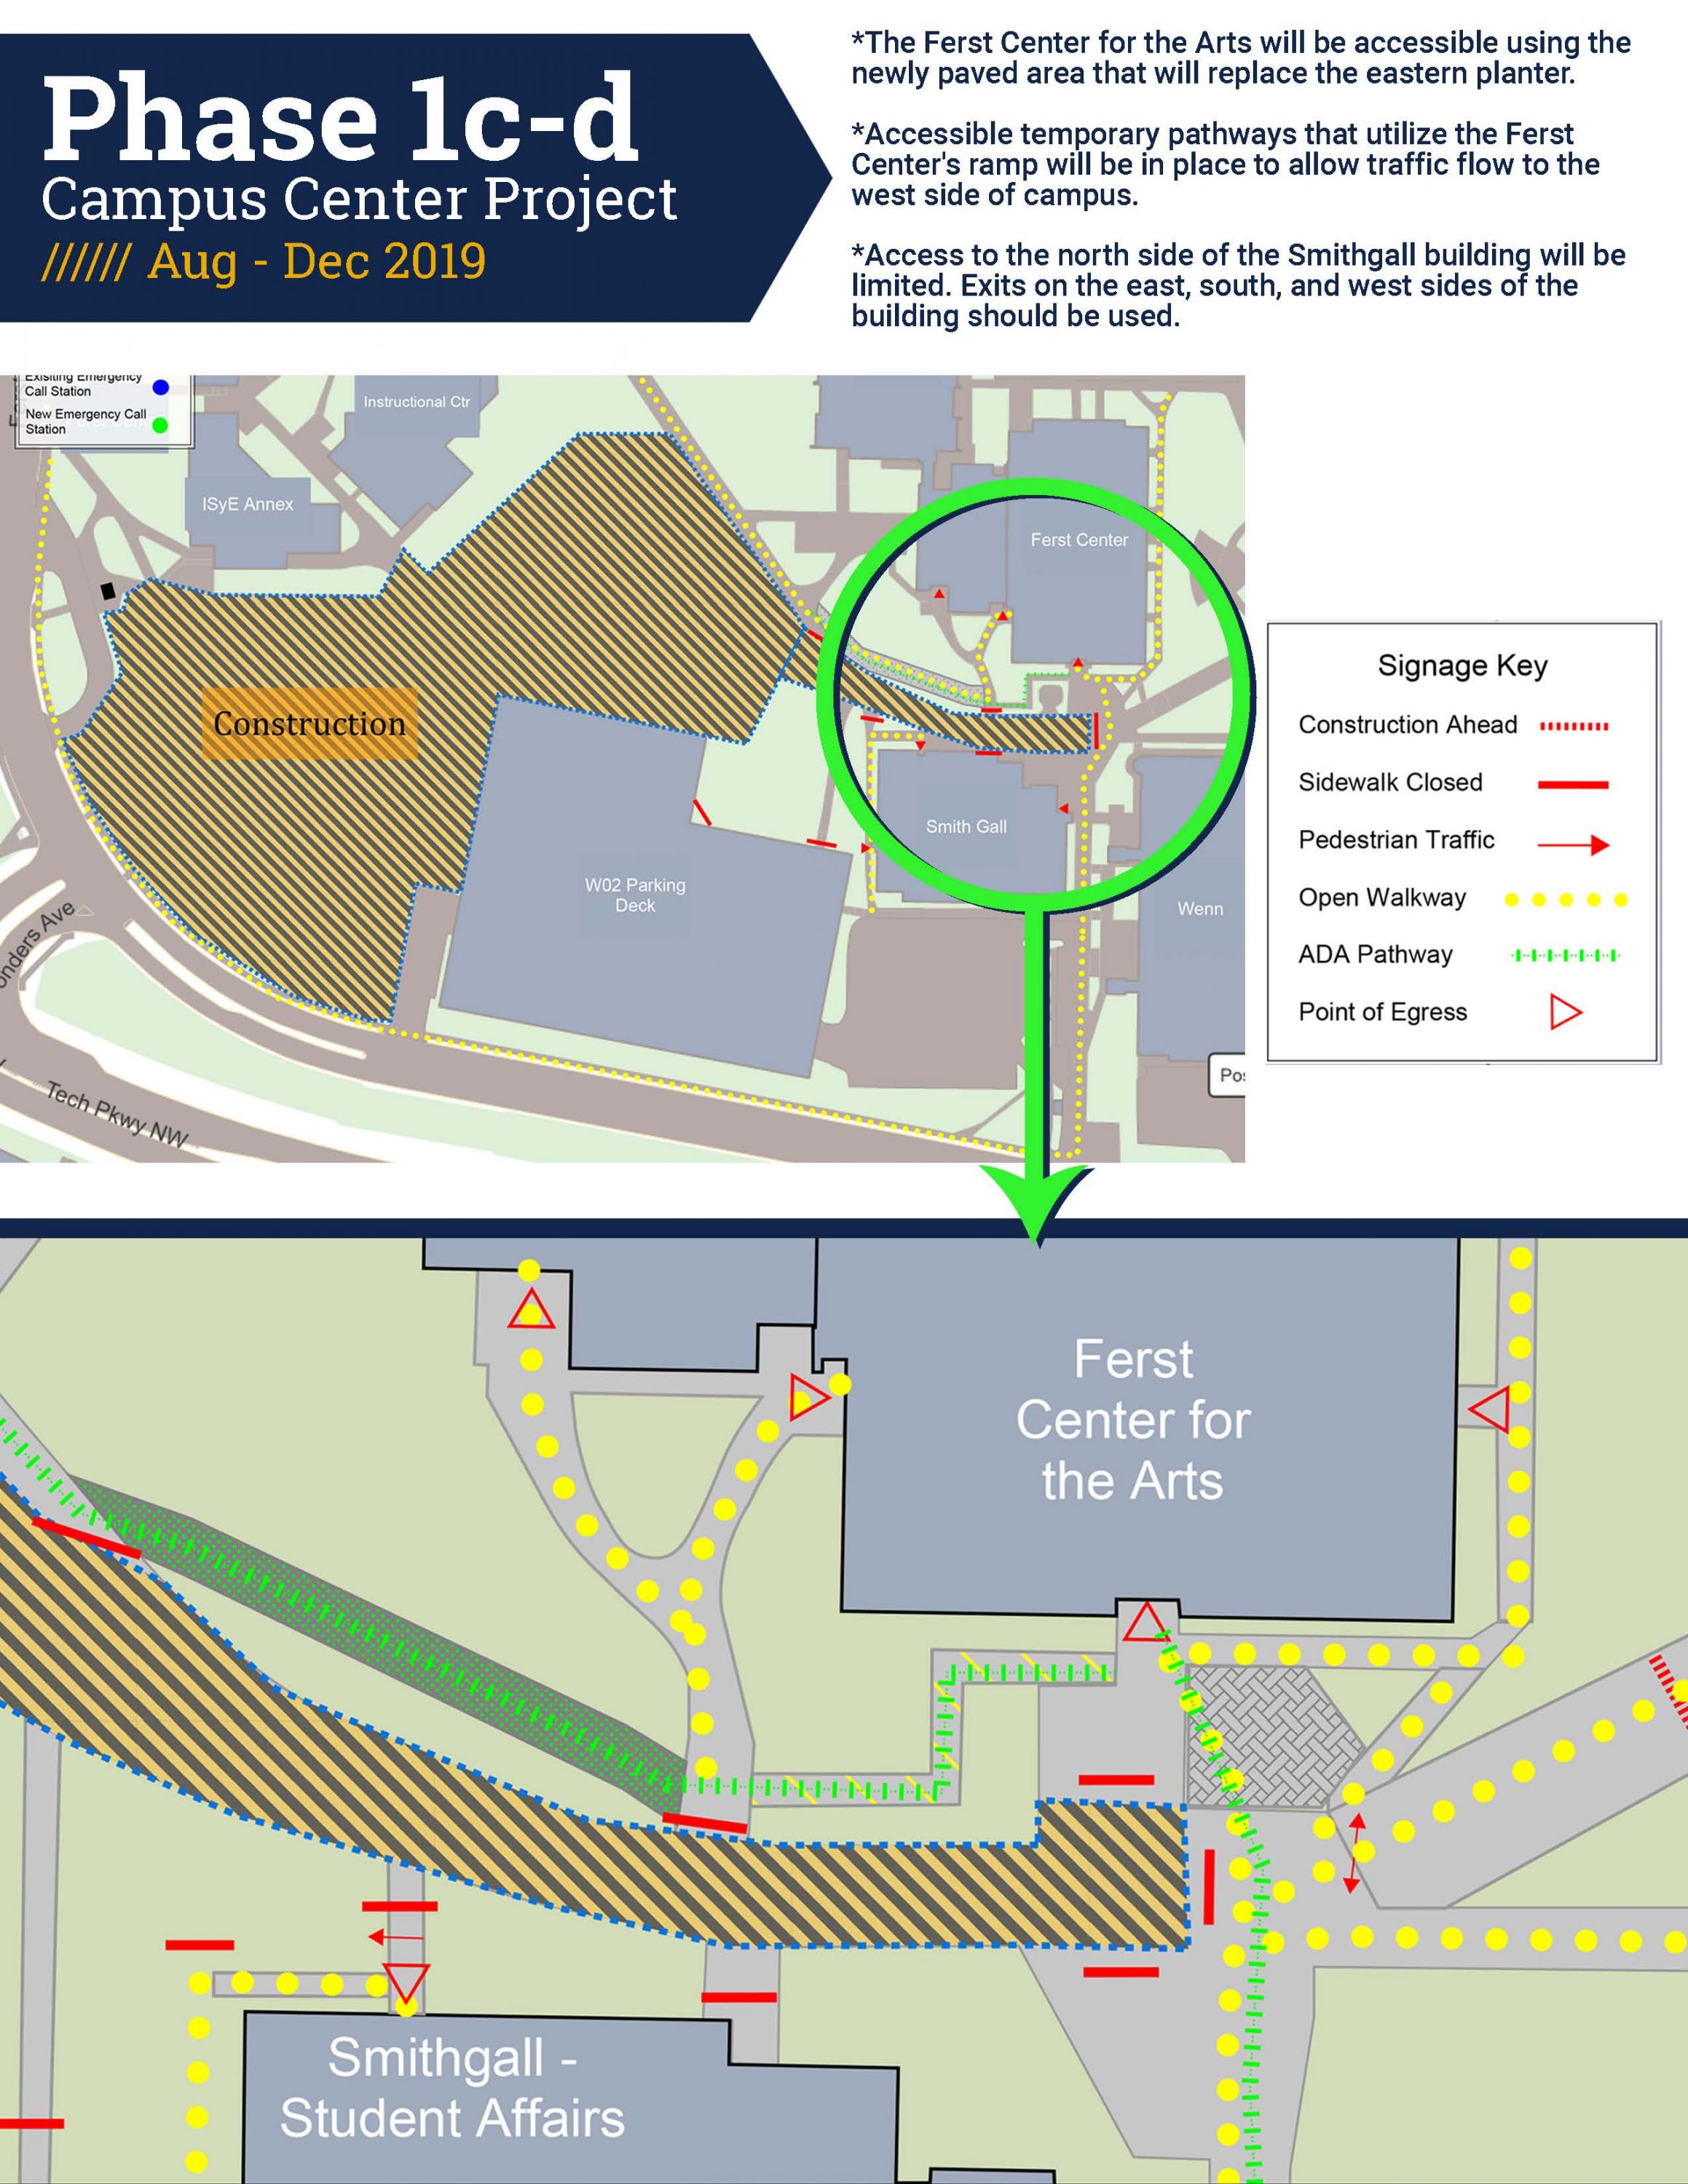 The diagram illustrates the alternate pathways that will be in place beginning in September to maintain traffic flow and sufficient egress in the event of an emergency from the Ferst Center or Smithgall Student Services Building (Flag Building).  